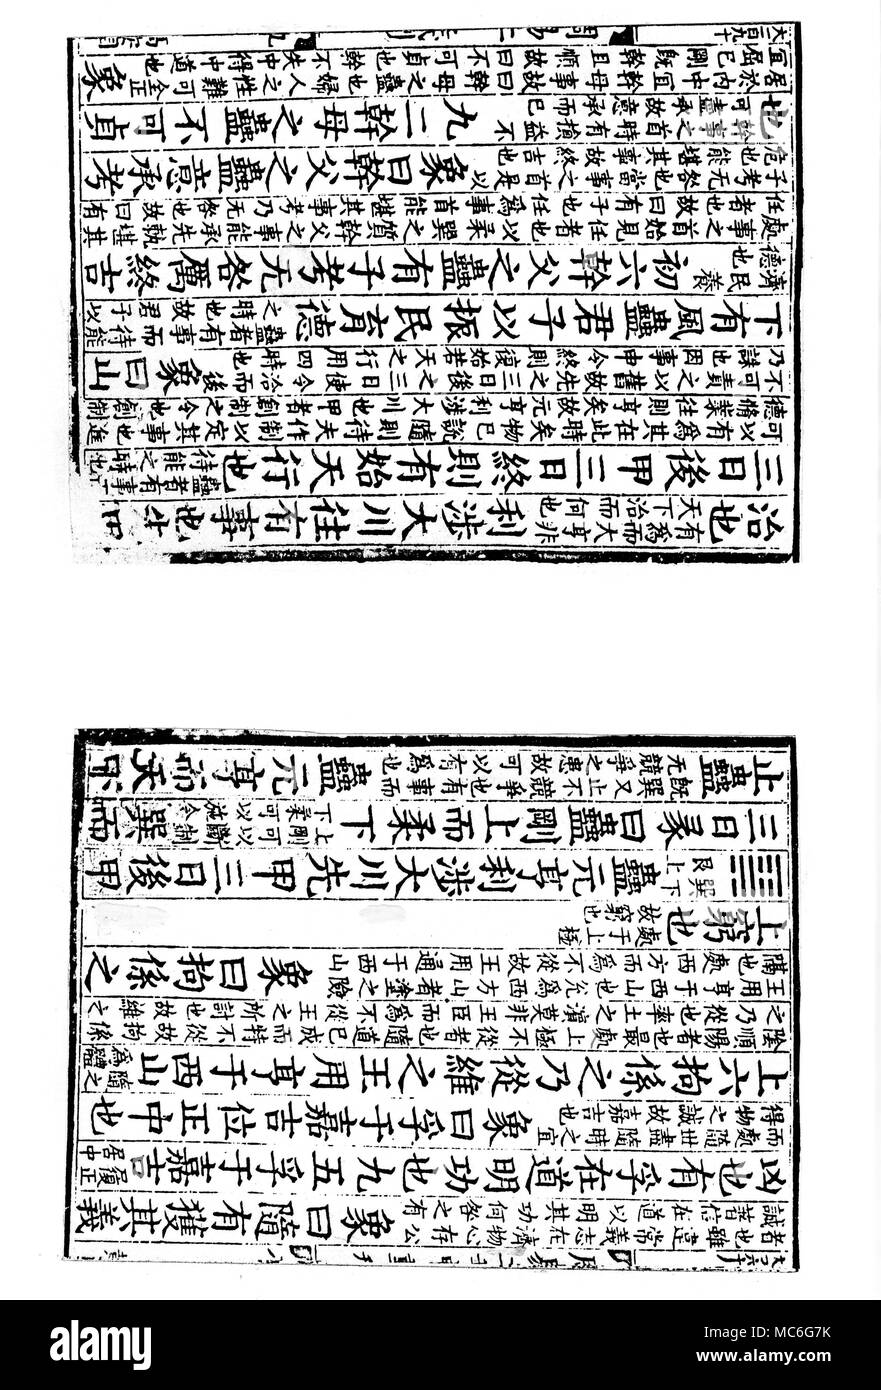 I CHING - HEXAGRAM No. 18 - KU The eighteenth hexagram of the sacred Book of Changes, or I Ching, or The Book of Chou, used in China both for divination and as a source of philosophical enquiry. This double page sets out the beginning of the reading for this hexagram in the third column from the left, of the right-hand page: the two pages are from a tenth century Chinese printed blockbook. The hexagram, of six lines is made from the meeting of the upper Ken (or 'Mountain') with the lower Sun (or 'Penetrating Wind'), and is followed by the traditional rationale pertaining to this meeting of Stock Photo